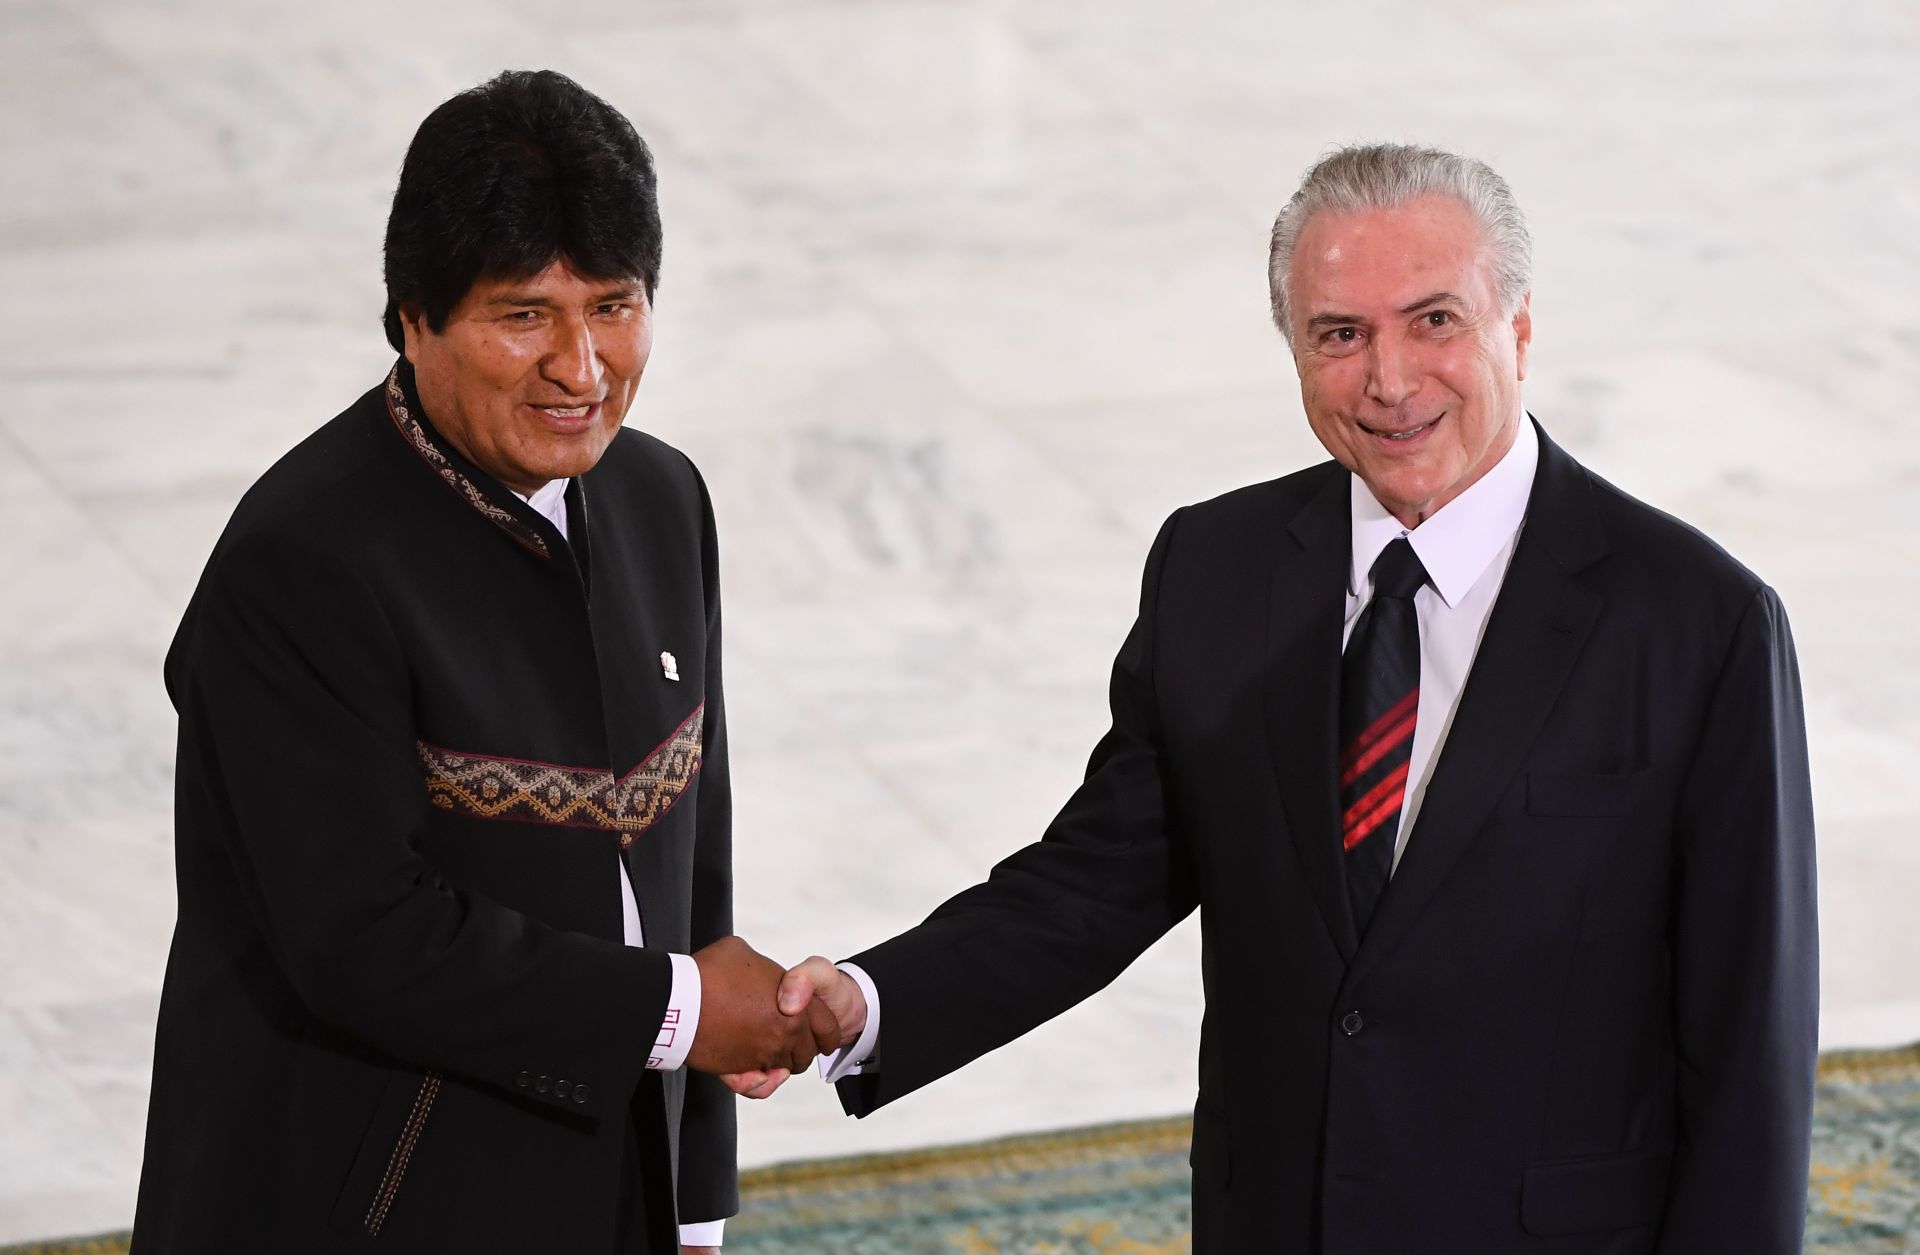 Bolivia and Brazil have an agreement to build a rail line through Bolivia that would connect the Peruvian port of Ilo with Brazil's rail network.